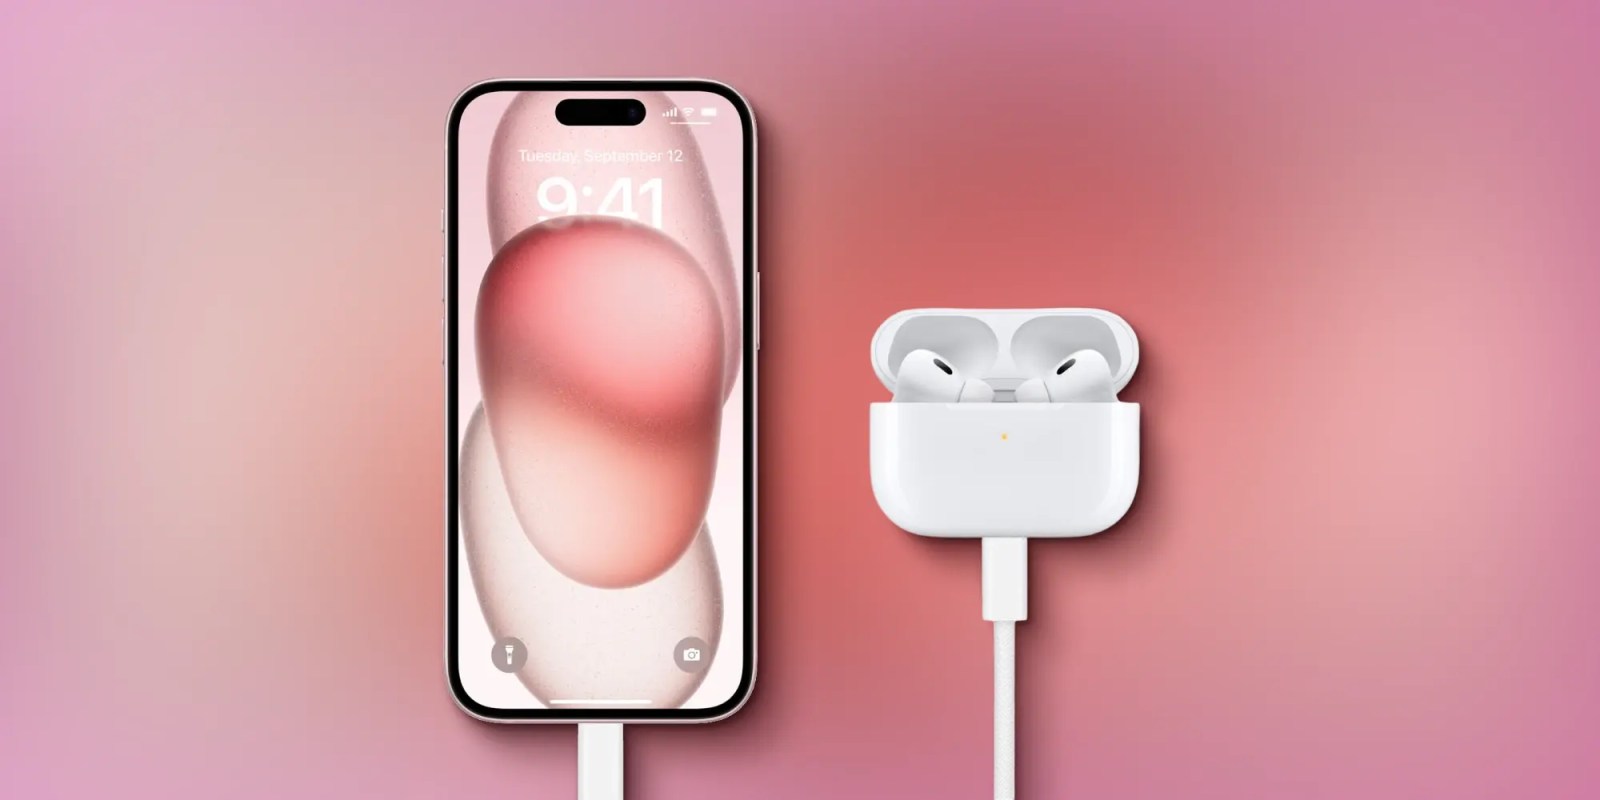 IPhone 15 USB-C Port: USB-C port on the iPhone 15 series can charge both  your Apple Watch and AirPods - Times of India